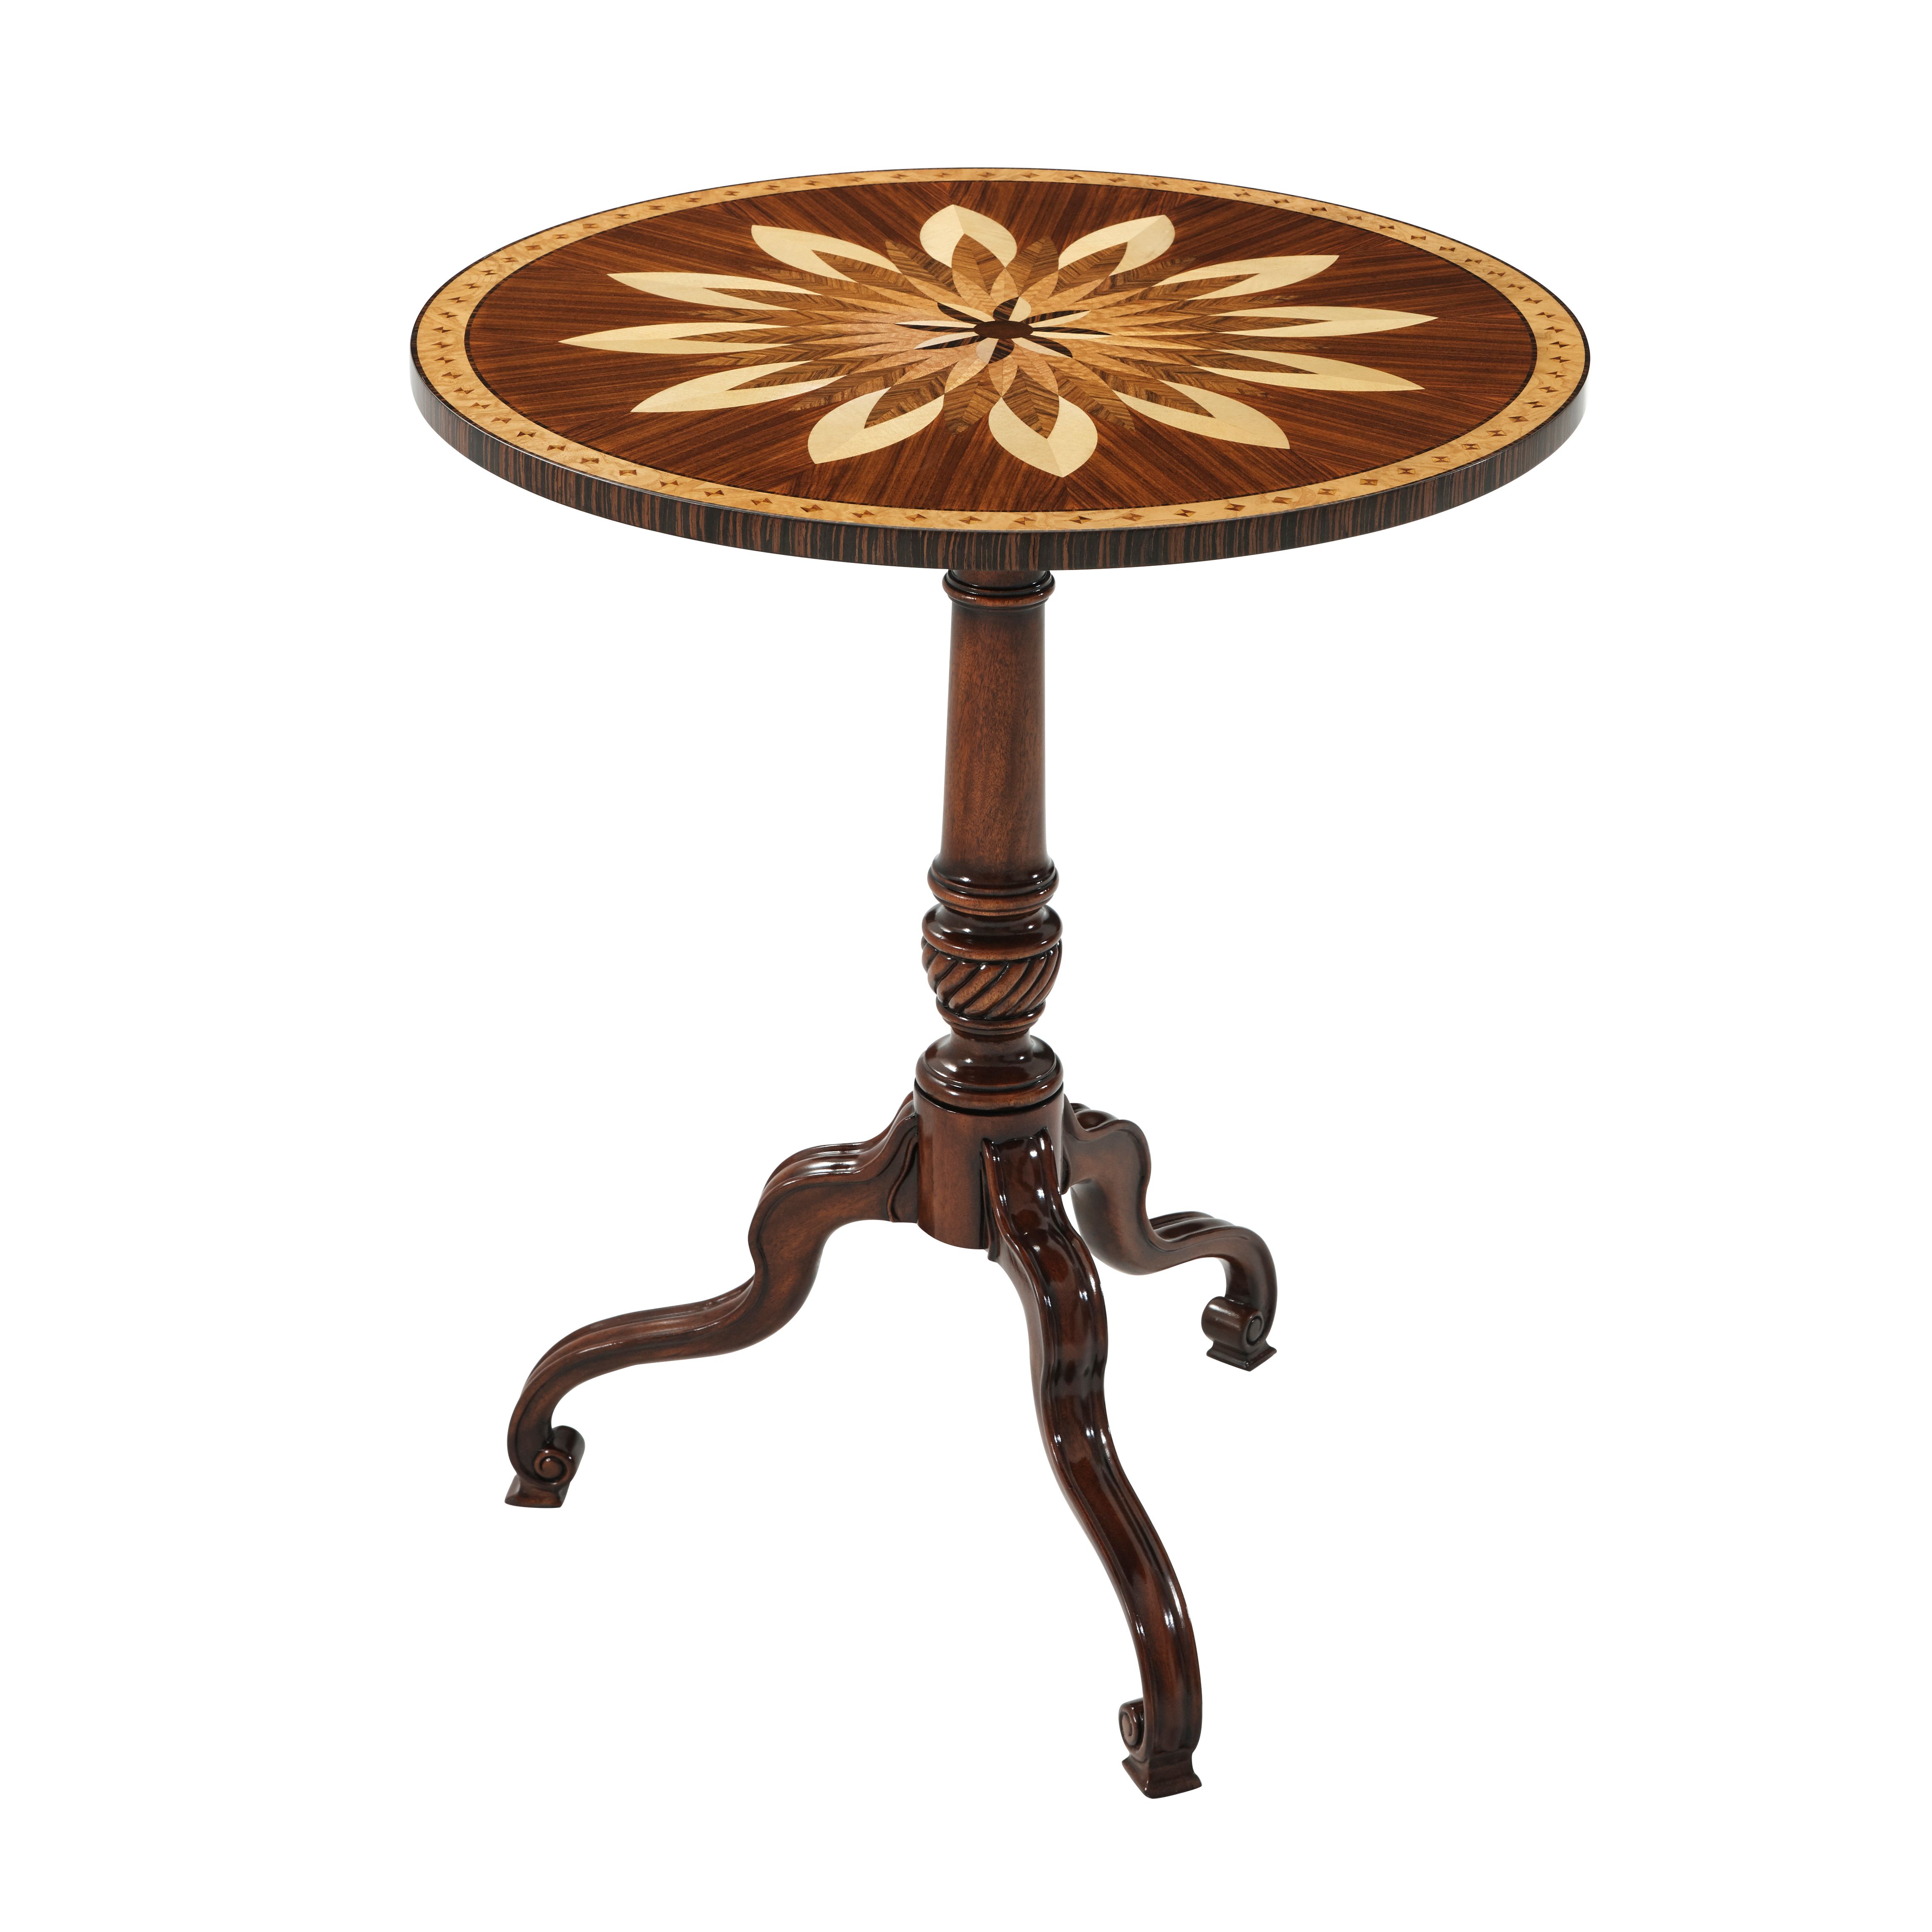 THE BEAUTY ACCENT TABLE